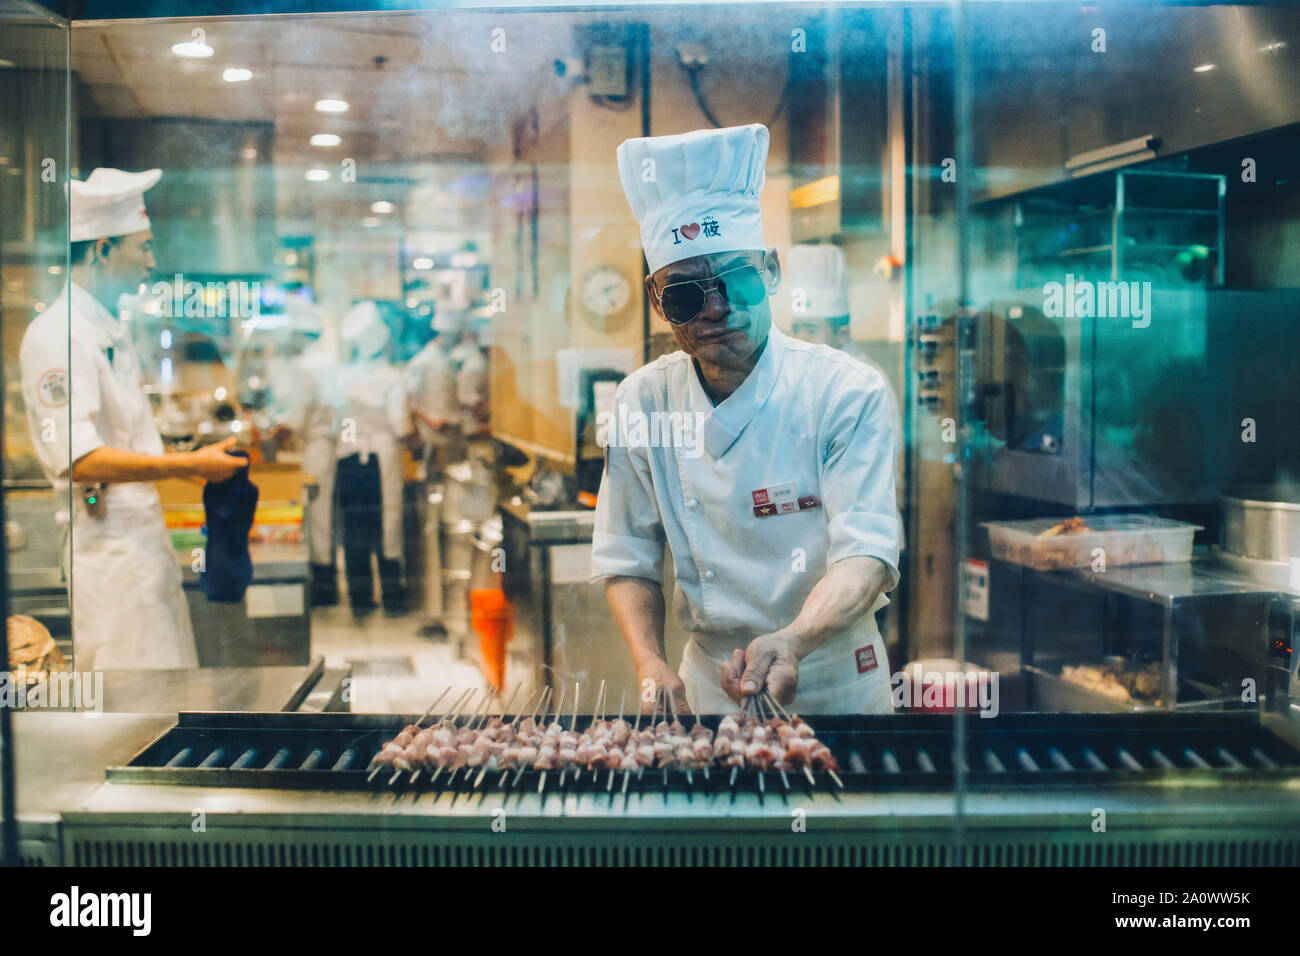 Elder staff preparing food in a chinese restant of a shopping mall in Guang zhou. Stock Photo